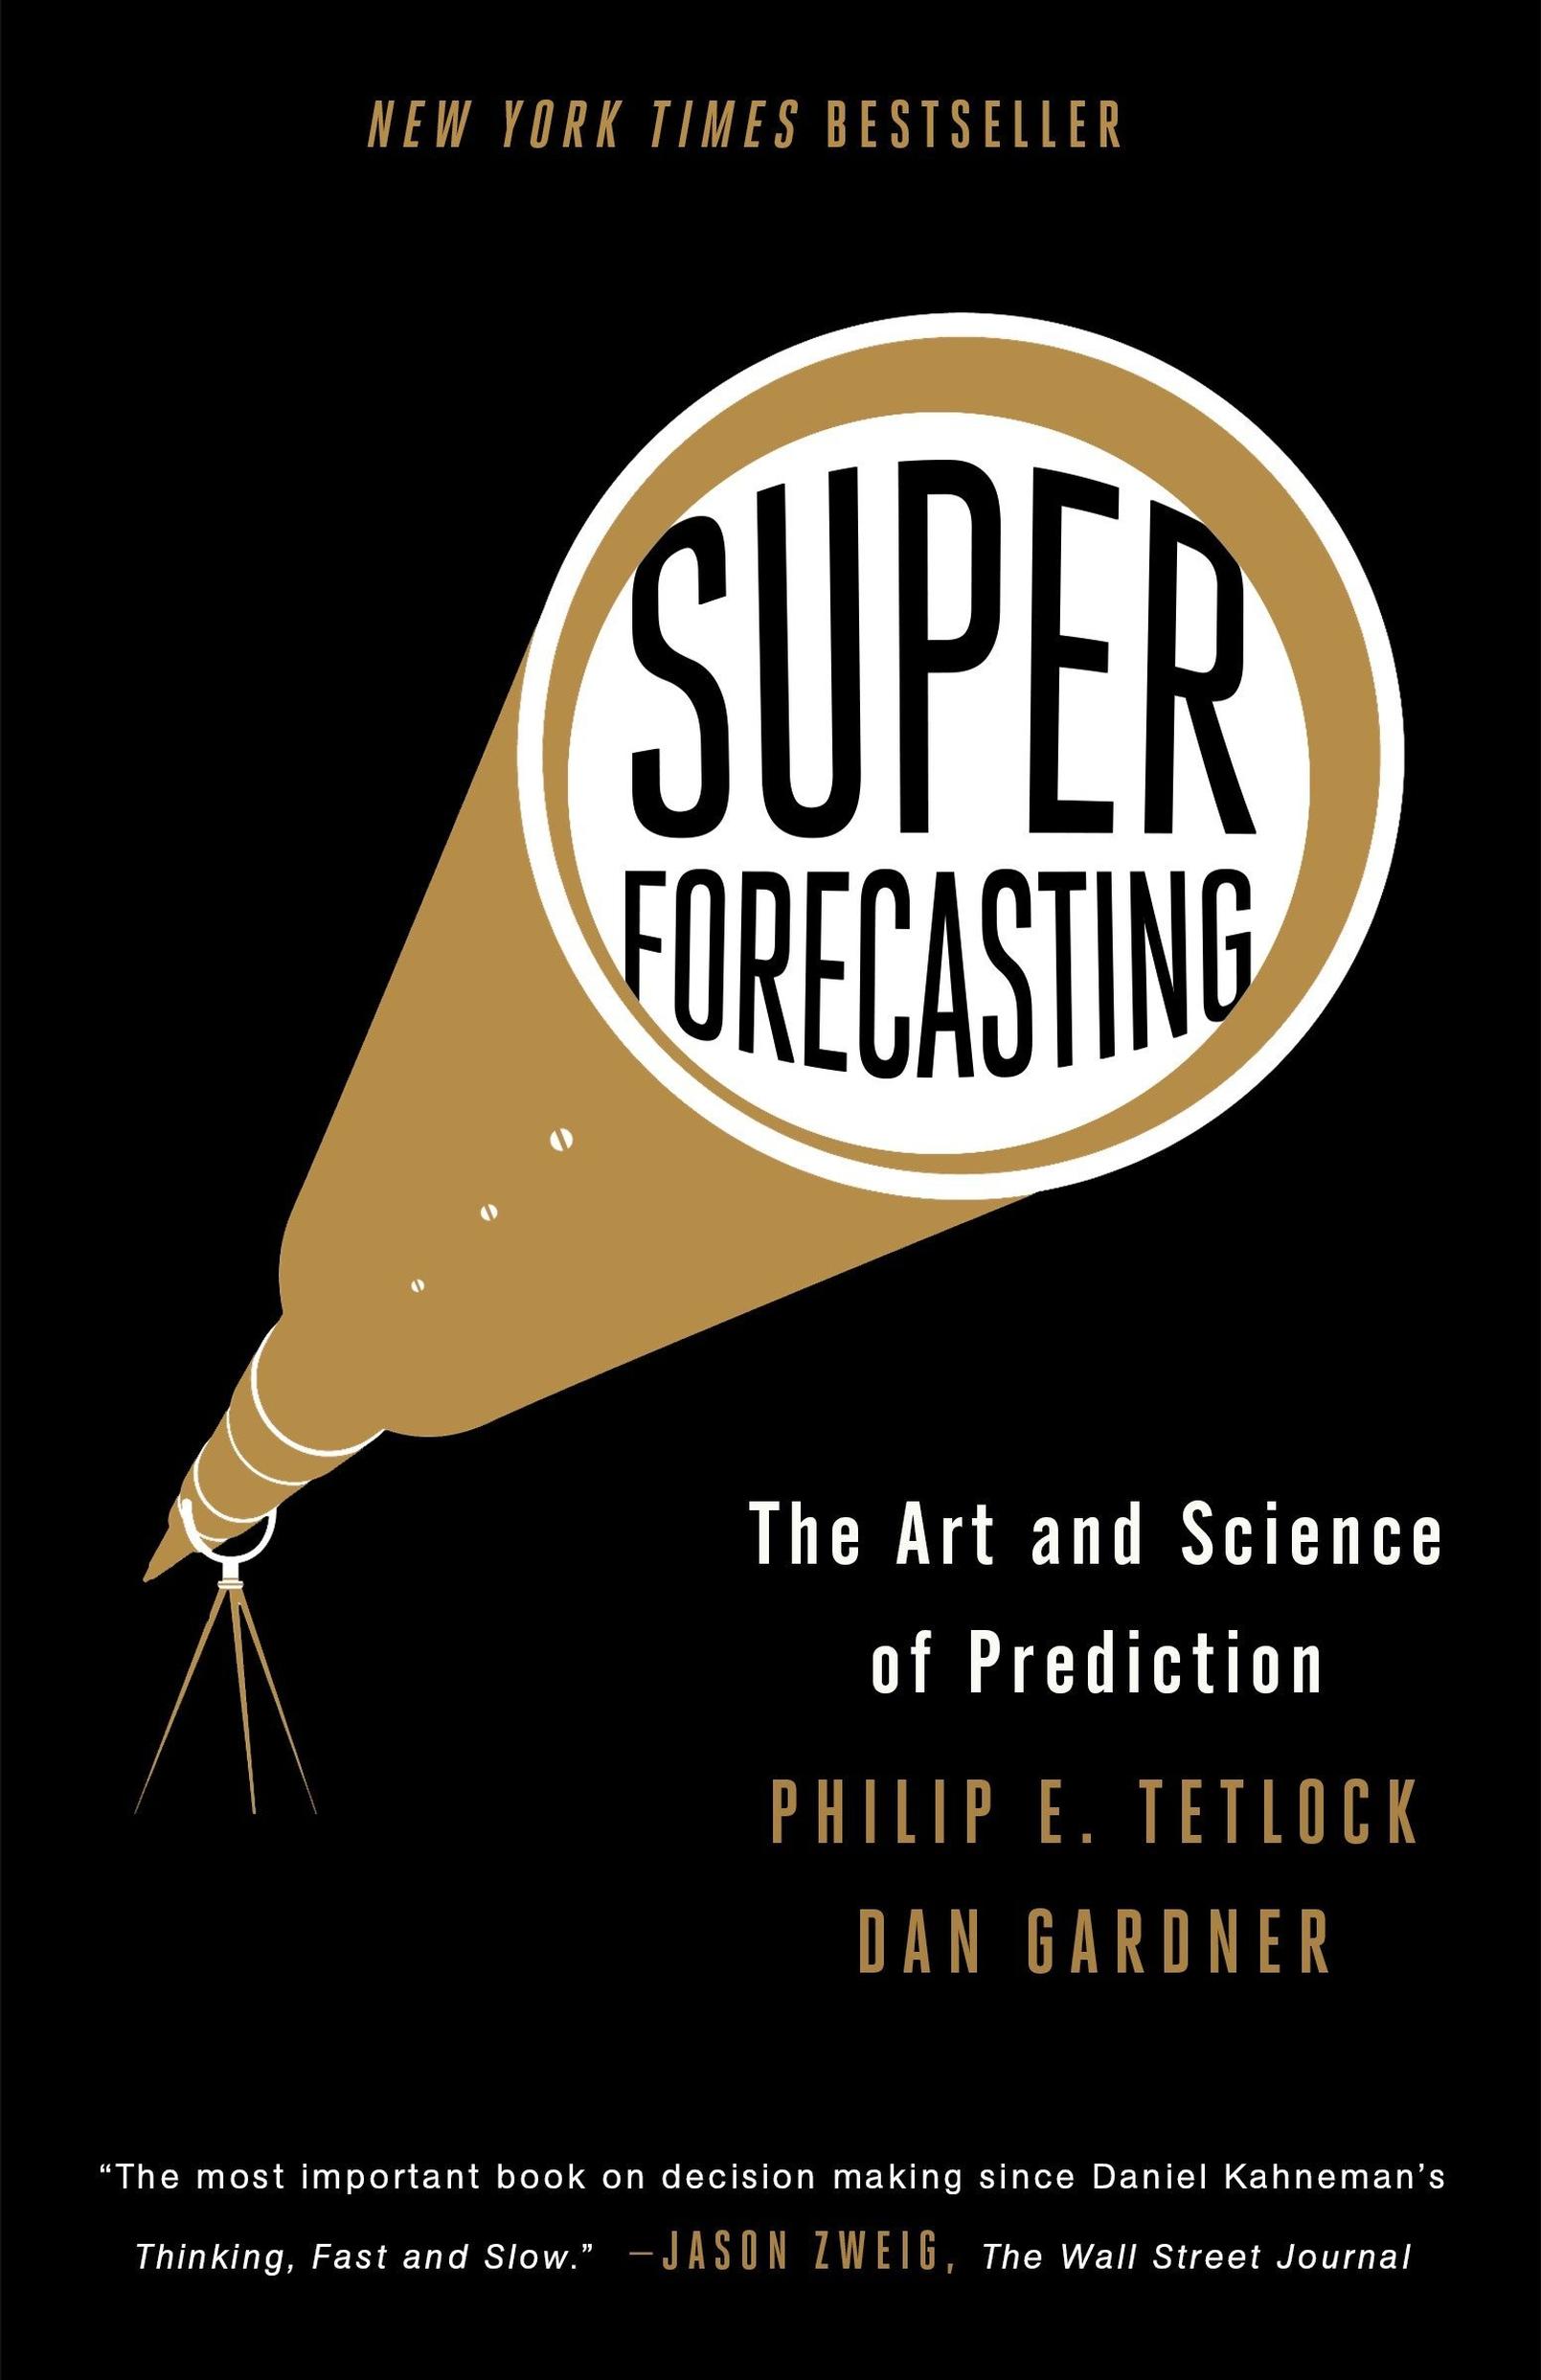 Back in 2011, the Good Judgment Project, led by Philip Tetlock, author of Superforecasting: The Art and Science of Prediction, was the undisputed victor in a tournament led by the US-based Intelligence Advanced Research Projects Activity (IARPA) to gauge the accuracy of forecasts